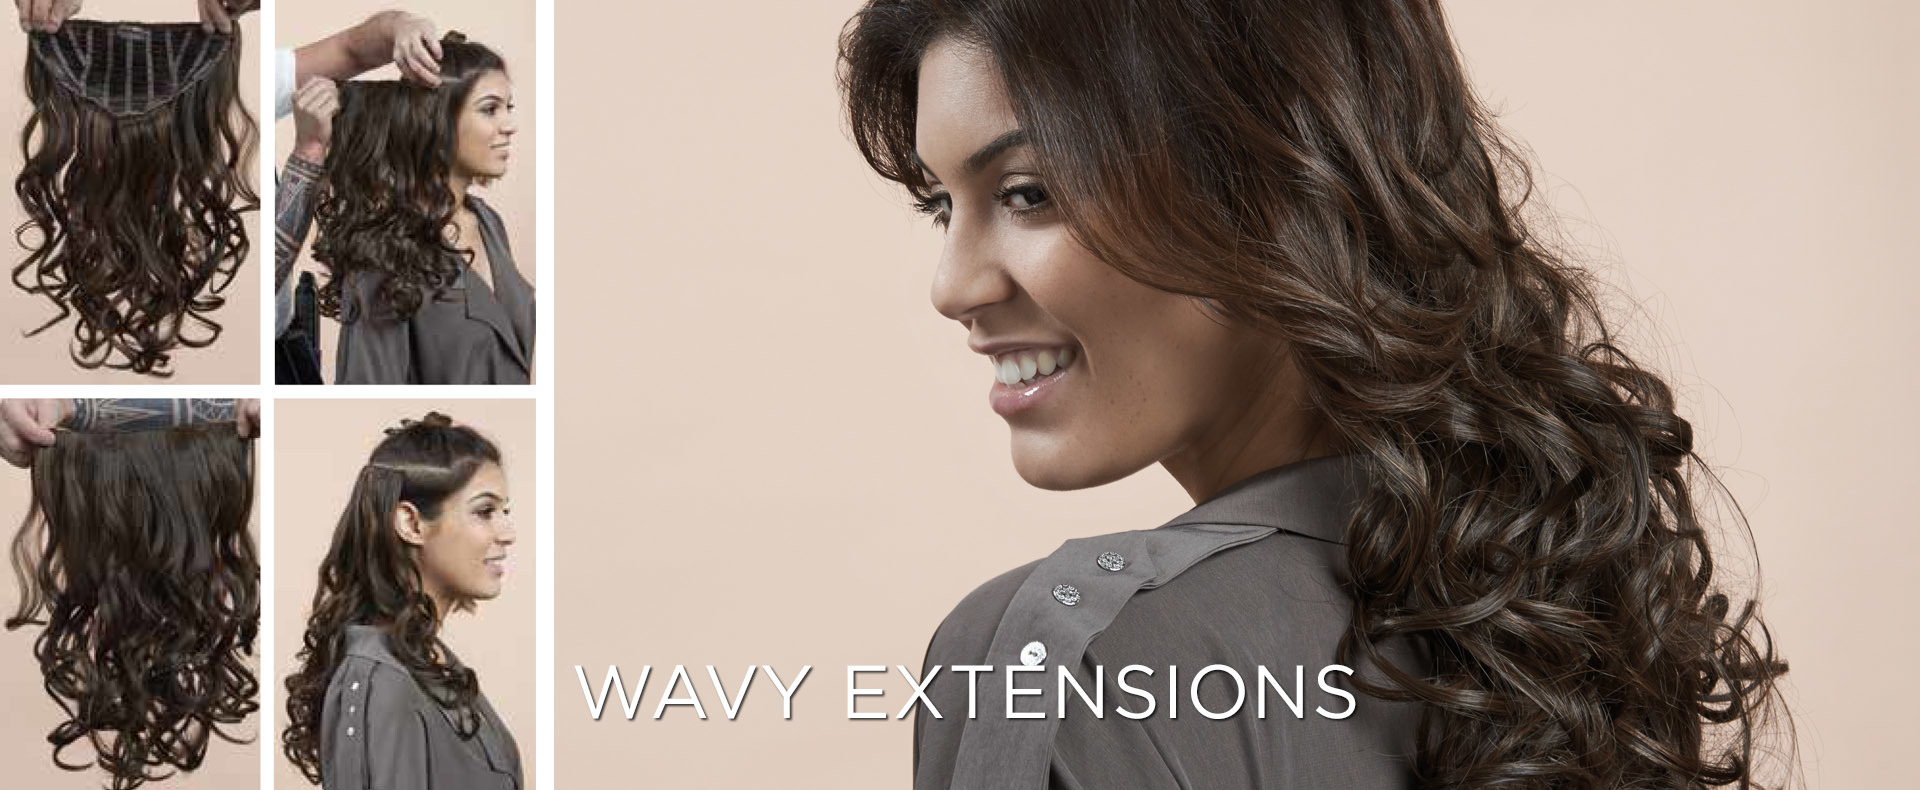 WAVY EXTENSION (© Great Lengths)